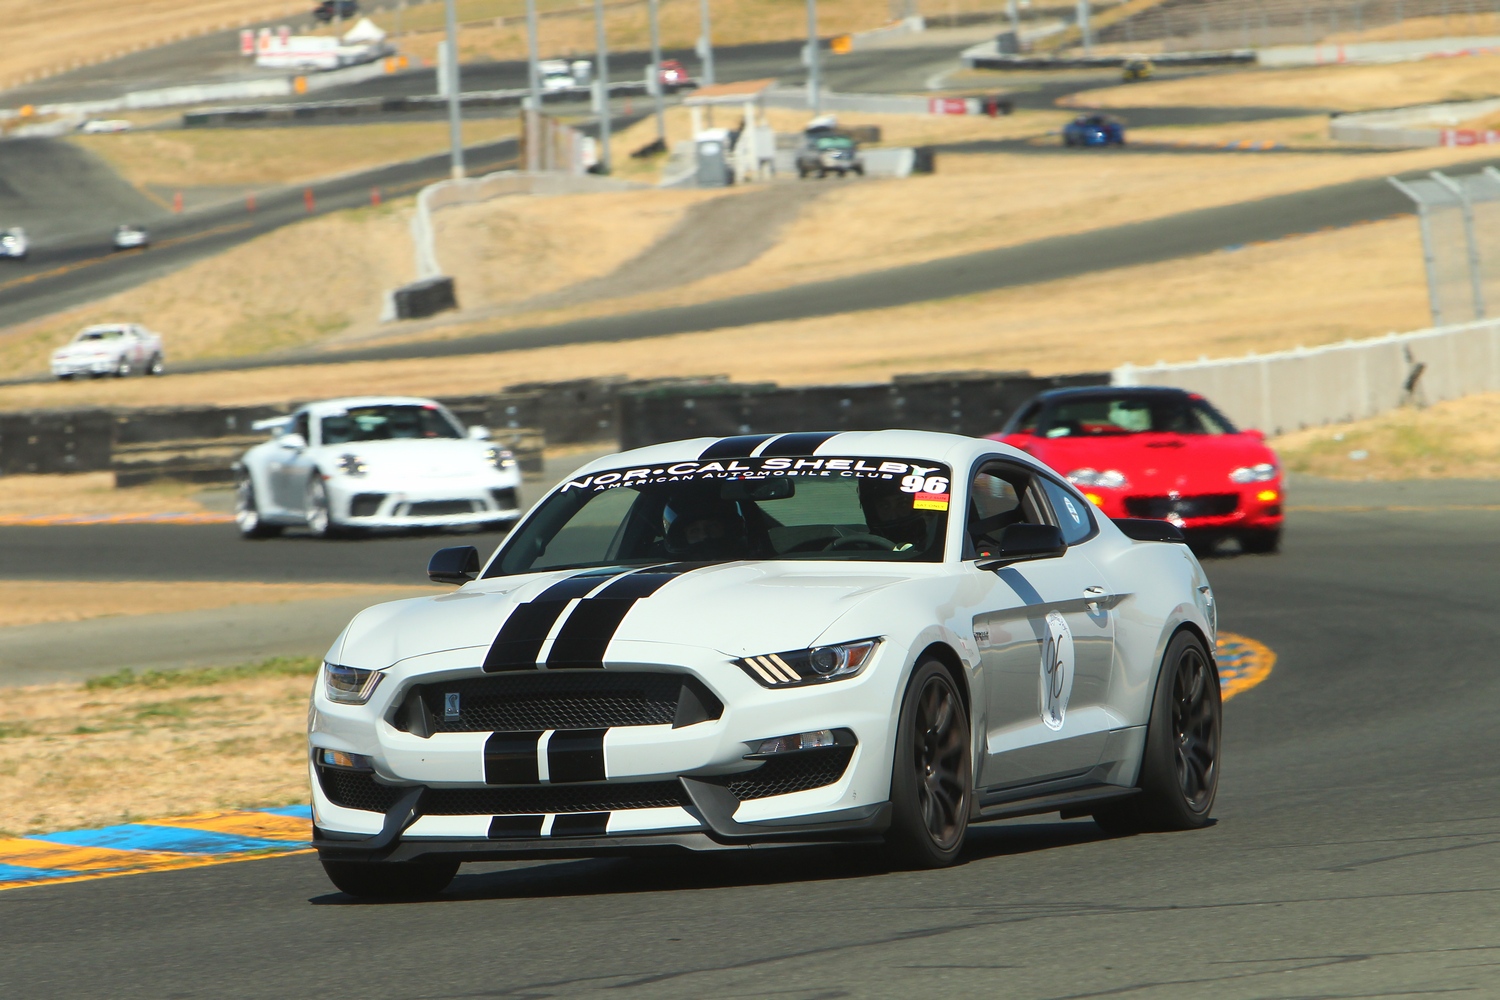 PHOTO GALLERY Nor Cal Shelby MiniNationals at Sonoma Raceway THE SHOP